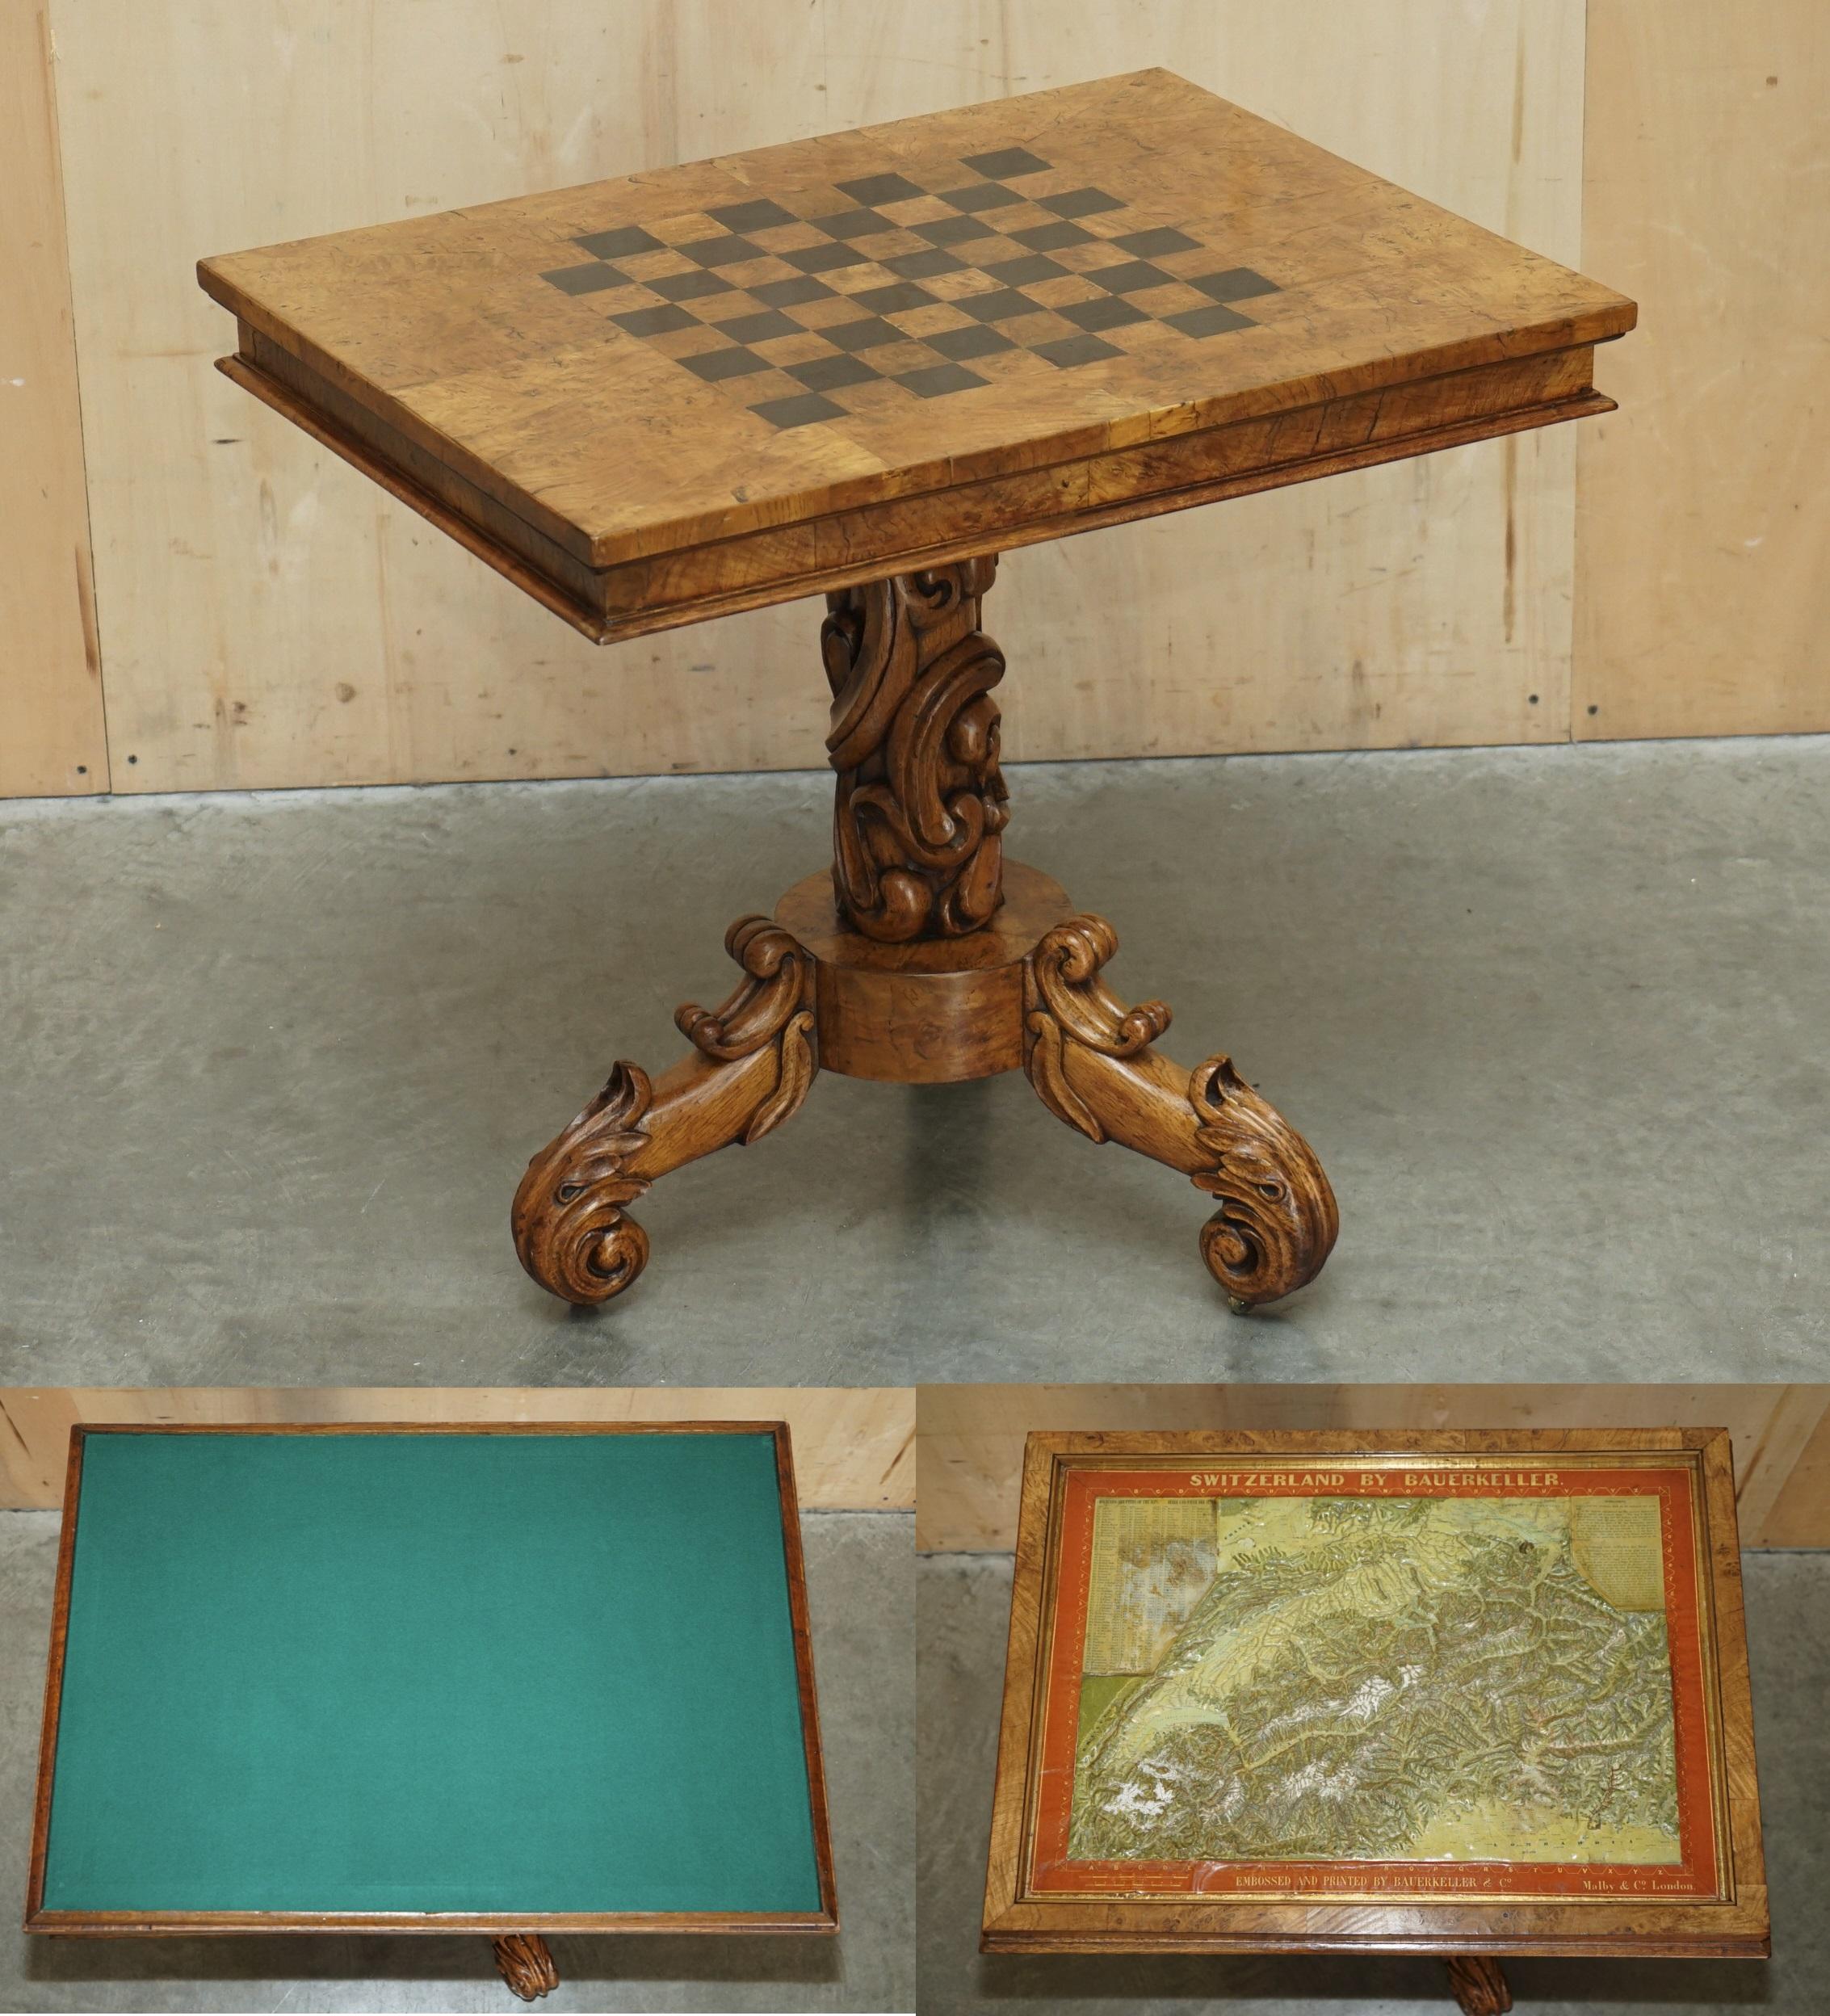 Royal House Antiques

Royal House Antiques is delighted to offer for sale this super rare, one of a kind, circa 1850 Malby & Co London Burr Walnut chessboard table with green baize card playing surface and unique 3D made of Switzerland by